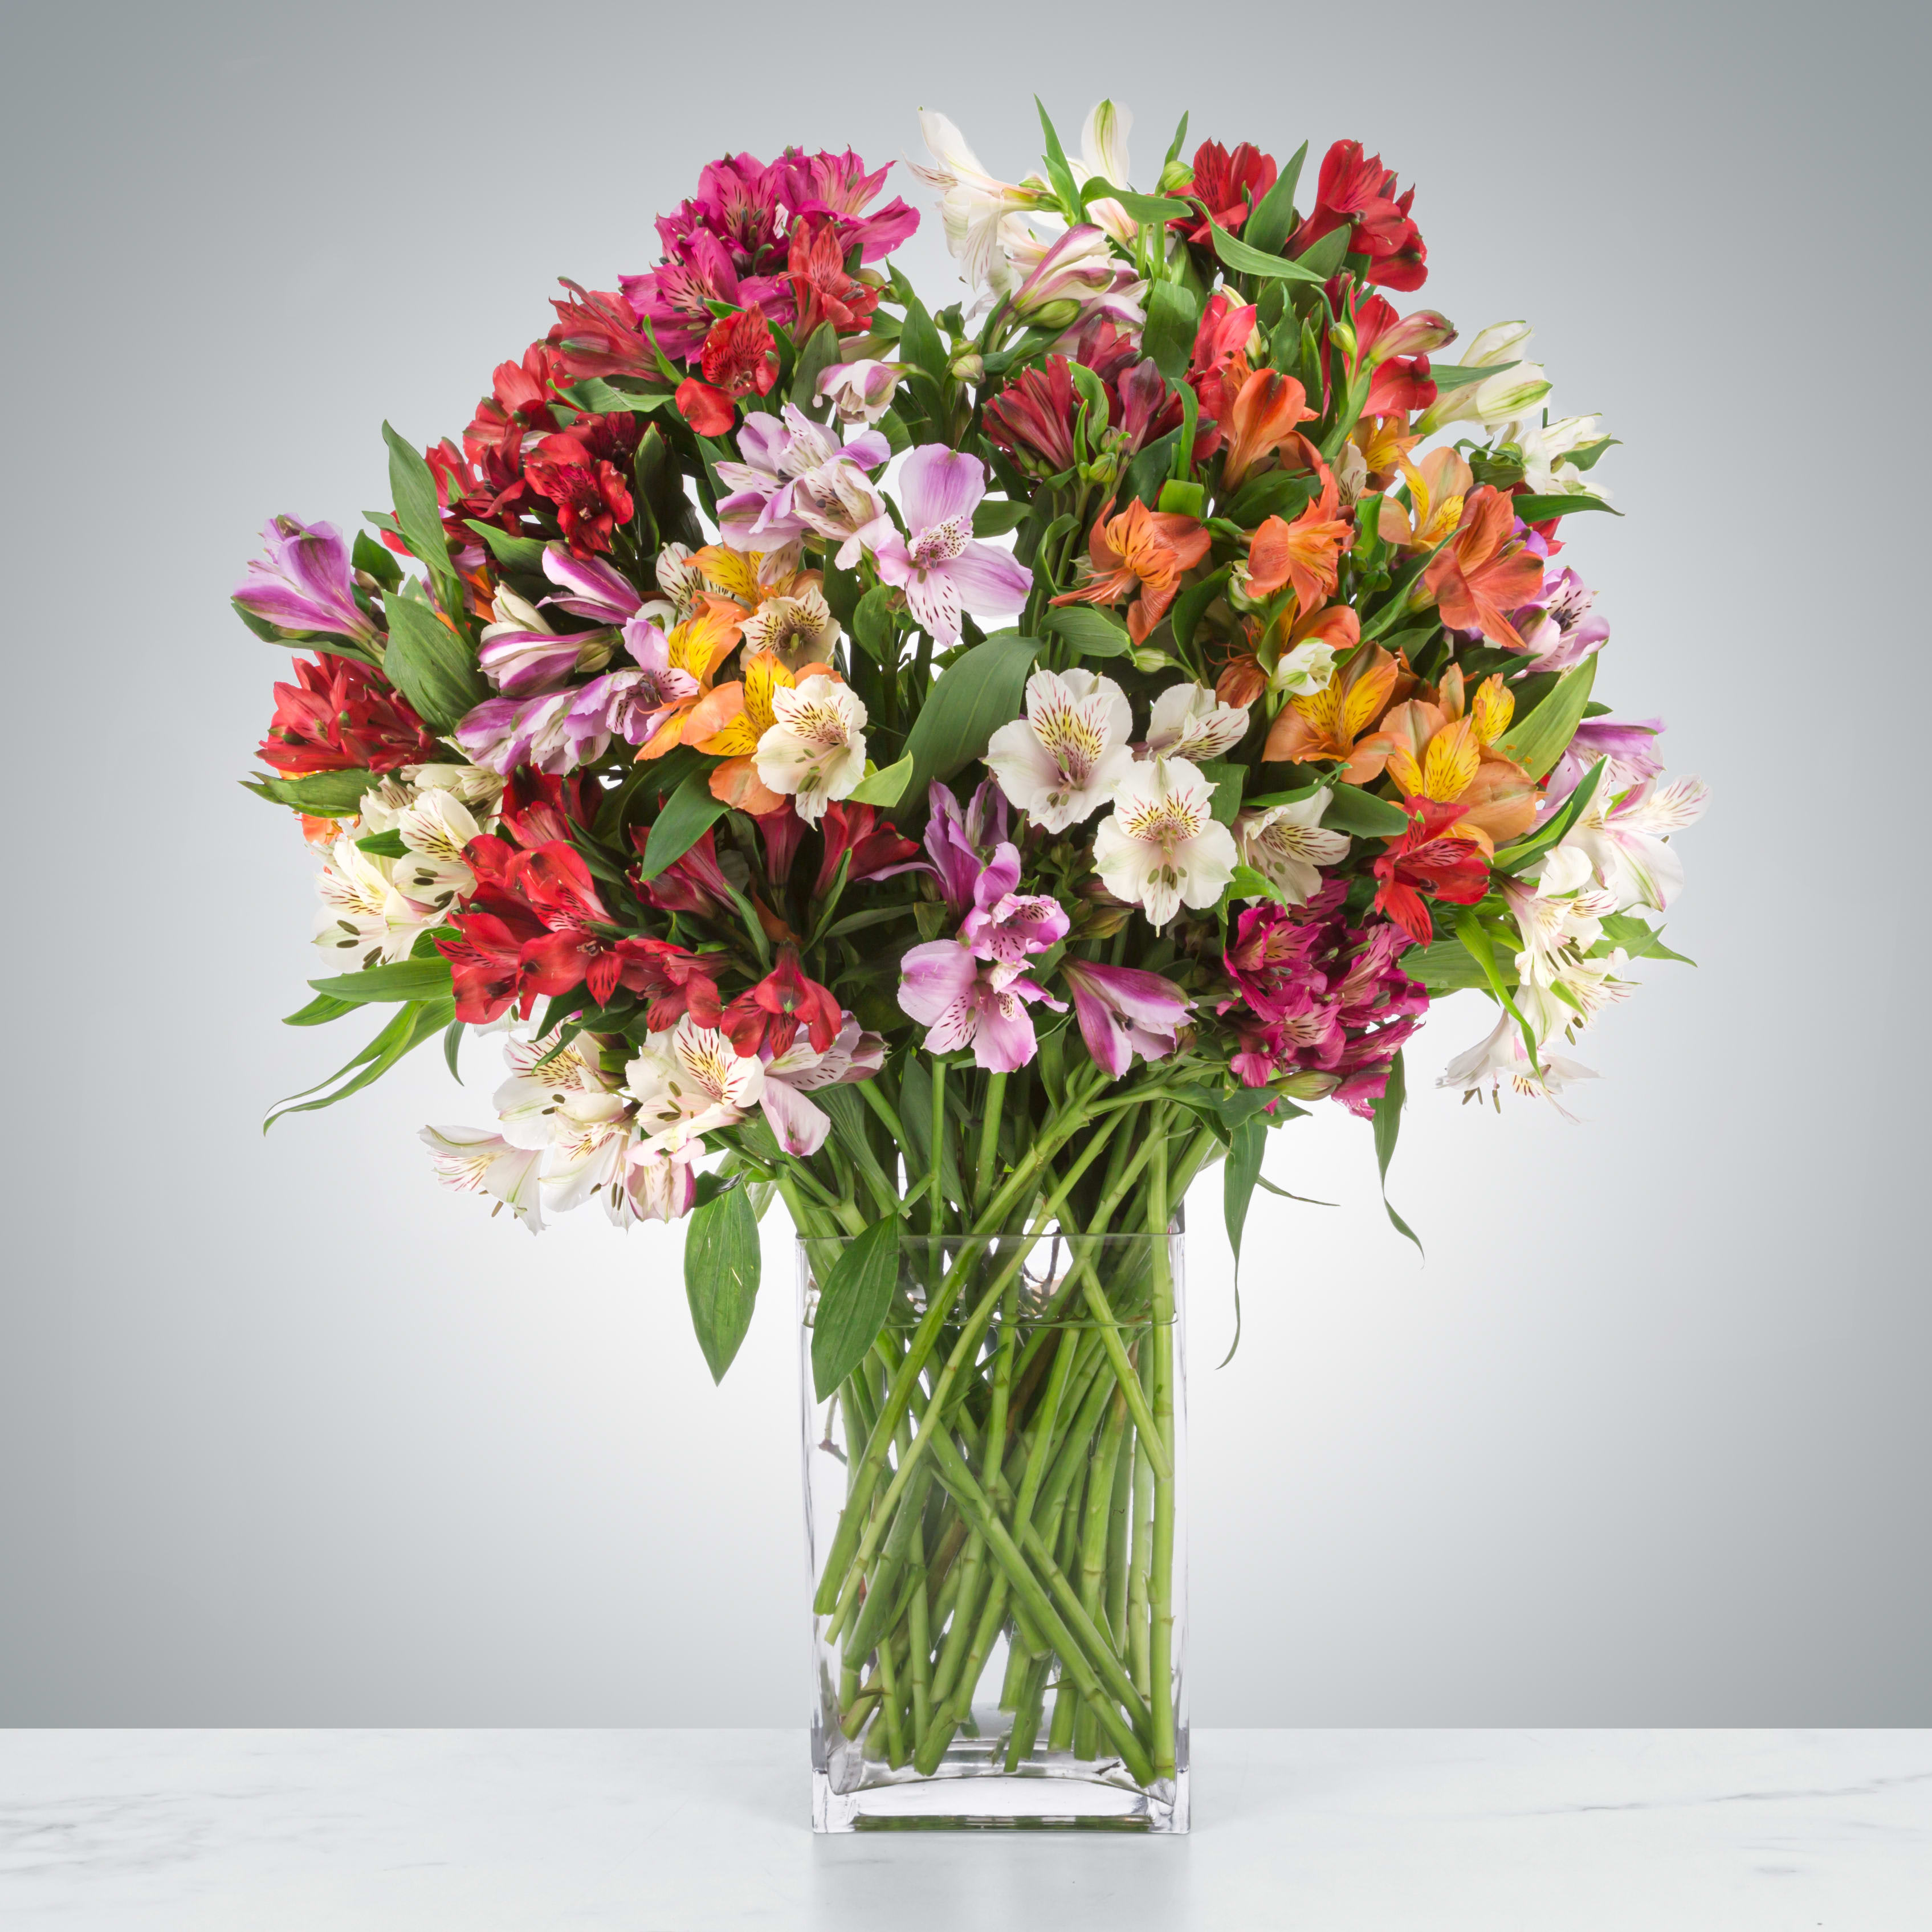 Amazing Alstroemeria by BloomNation™ - Alstroemeria often represents mutual support. This makes the arrangement the perfect choice for saying thank you or showing appreciation. Send this to your best friend, your family, or your coworker who always has your back.  1st Image: Standard 2nd Image: Premium